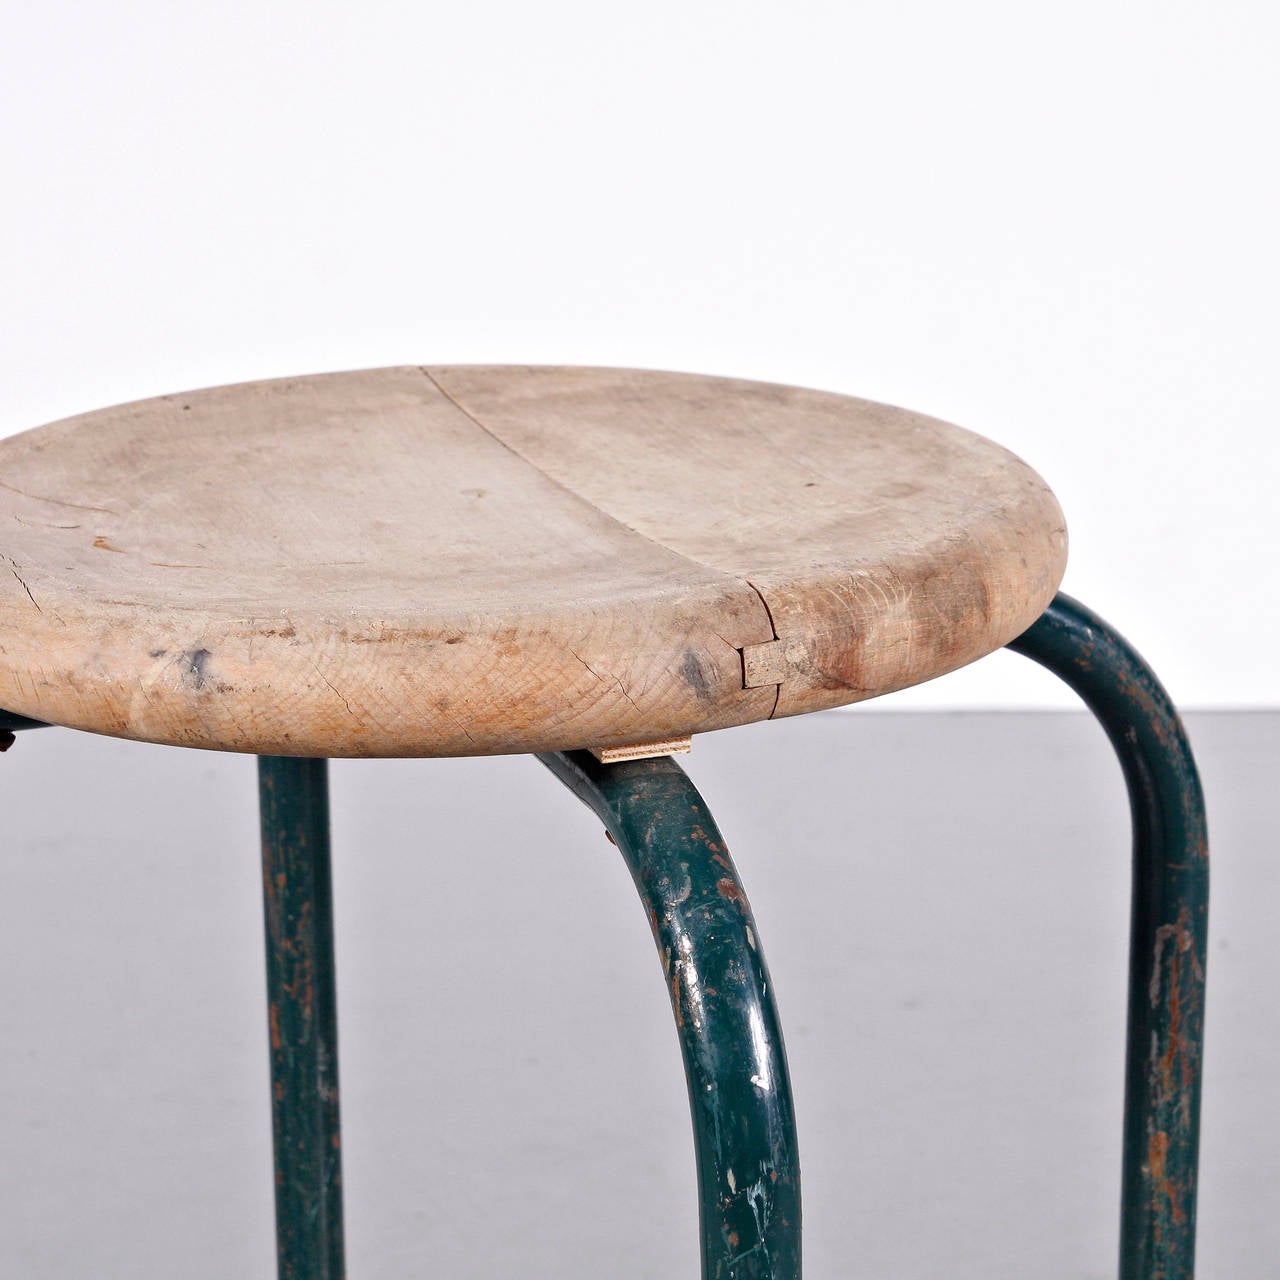 Mid-Century Modern Industrial Stool in the Manner of Jean Prouvé Stool, circa 1950